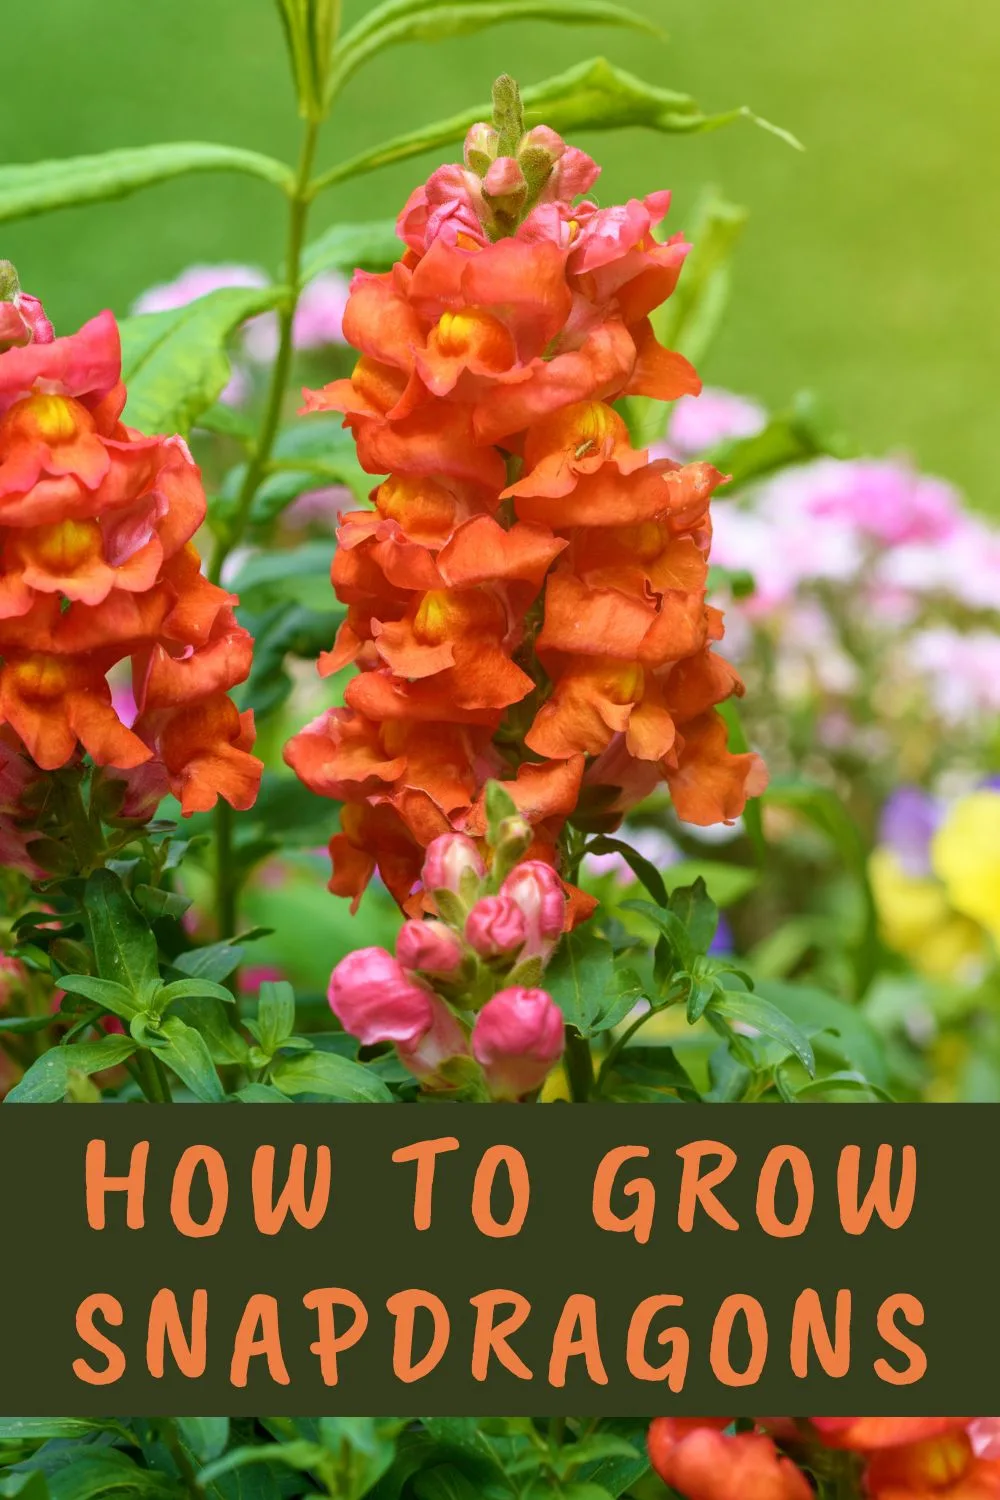 How to grow snapdragons